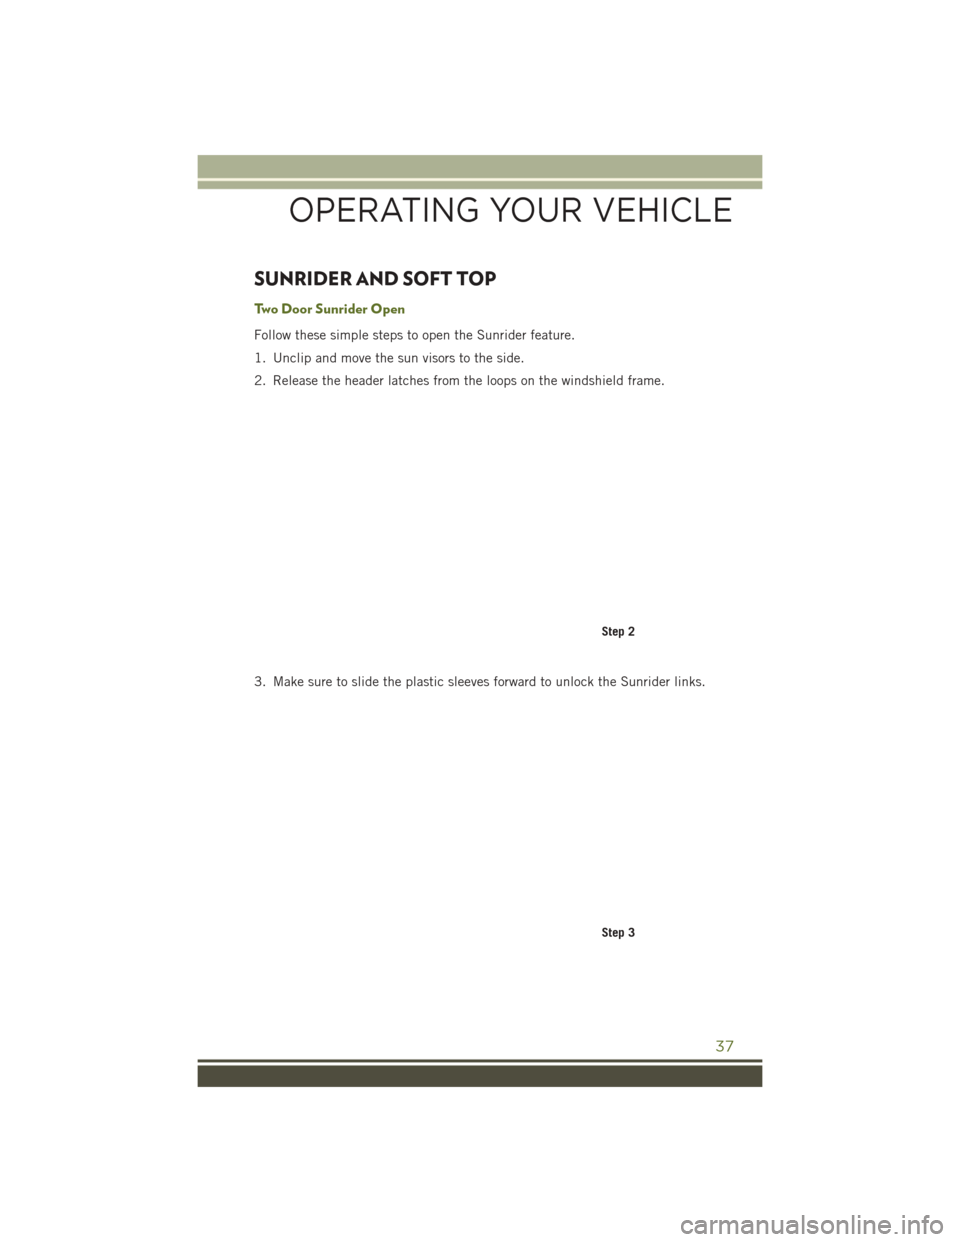 JEEP WRANGLER 2016 JK / 3.G Owners Guide SUNRIDER AND SOFT TOP
Two Door Sunrider Open
Follow these simple steps to open the Sunrider feature.
1. Unclip and move the sun visors to the side.
2. Release the header latches from the loops on the 